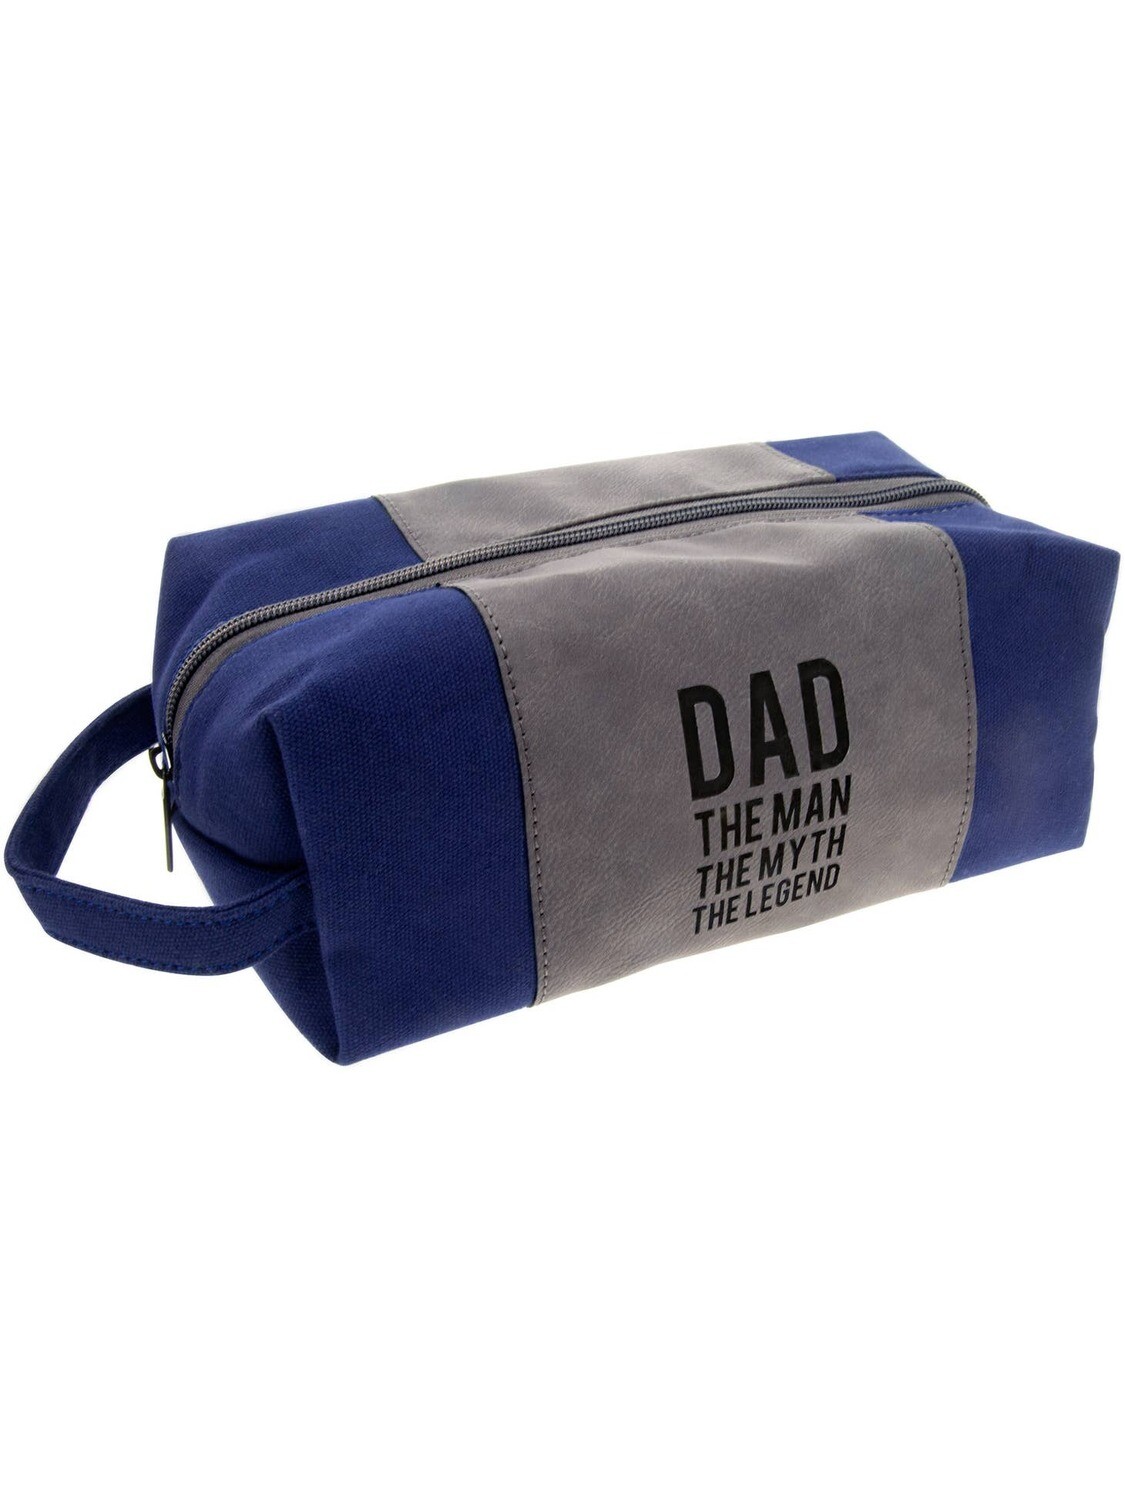 Dad the Legend -Canvas Toiletry Bag